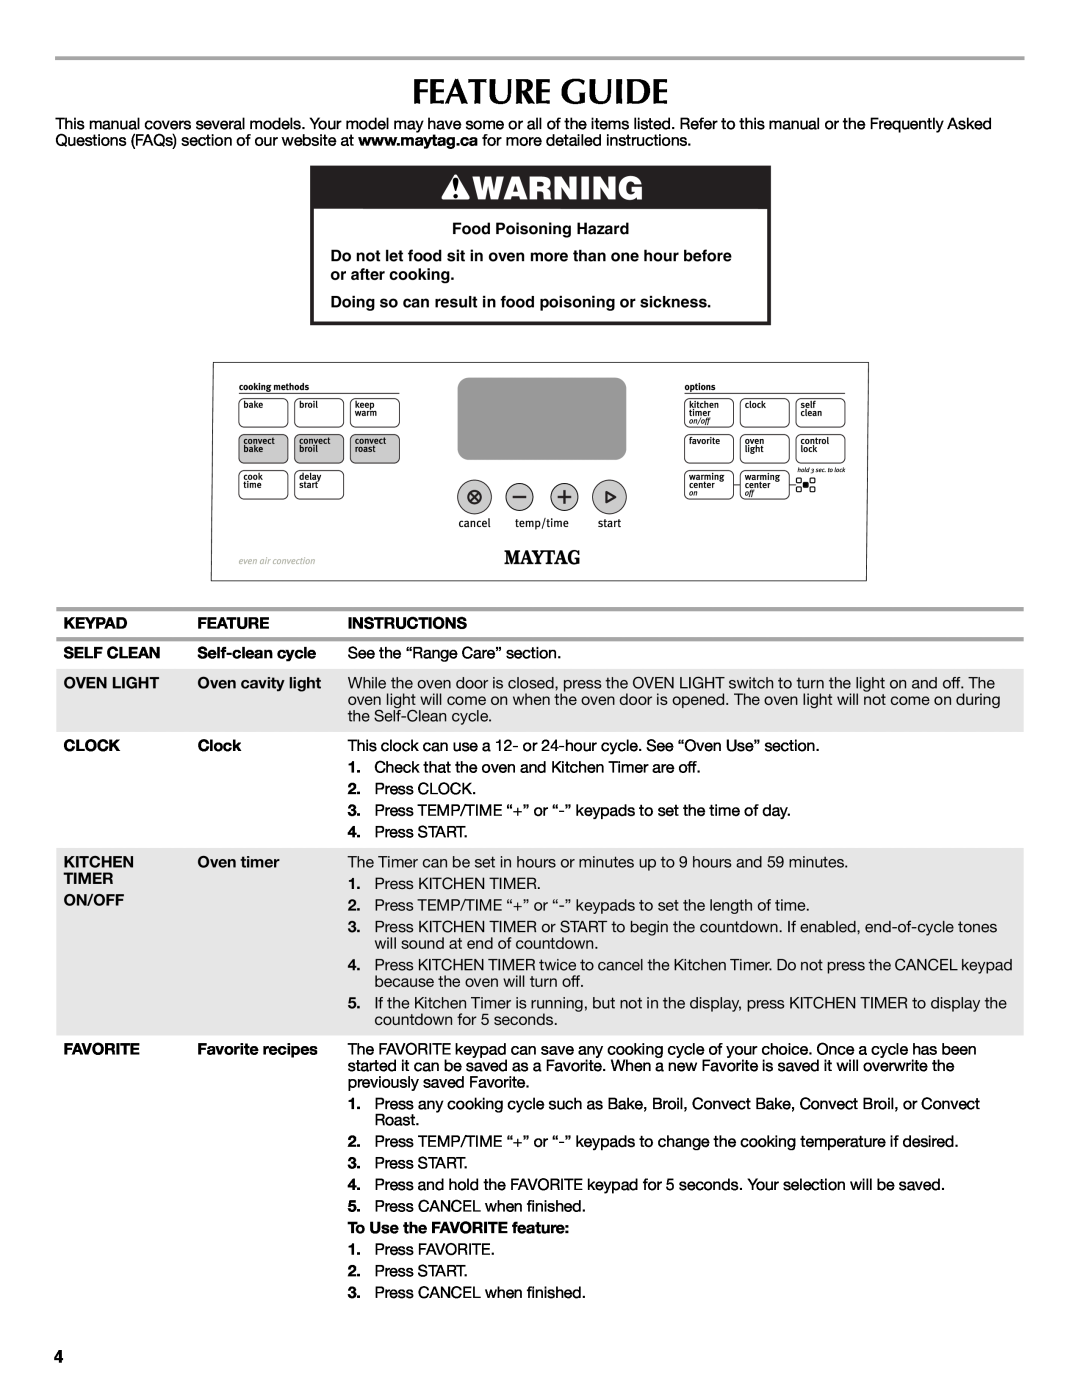 Maytag W10239461A warranty Feature Guide, Food Poisoning Hazard, Doing so can result in food poisoning or sickness 